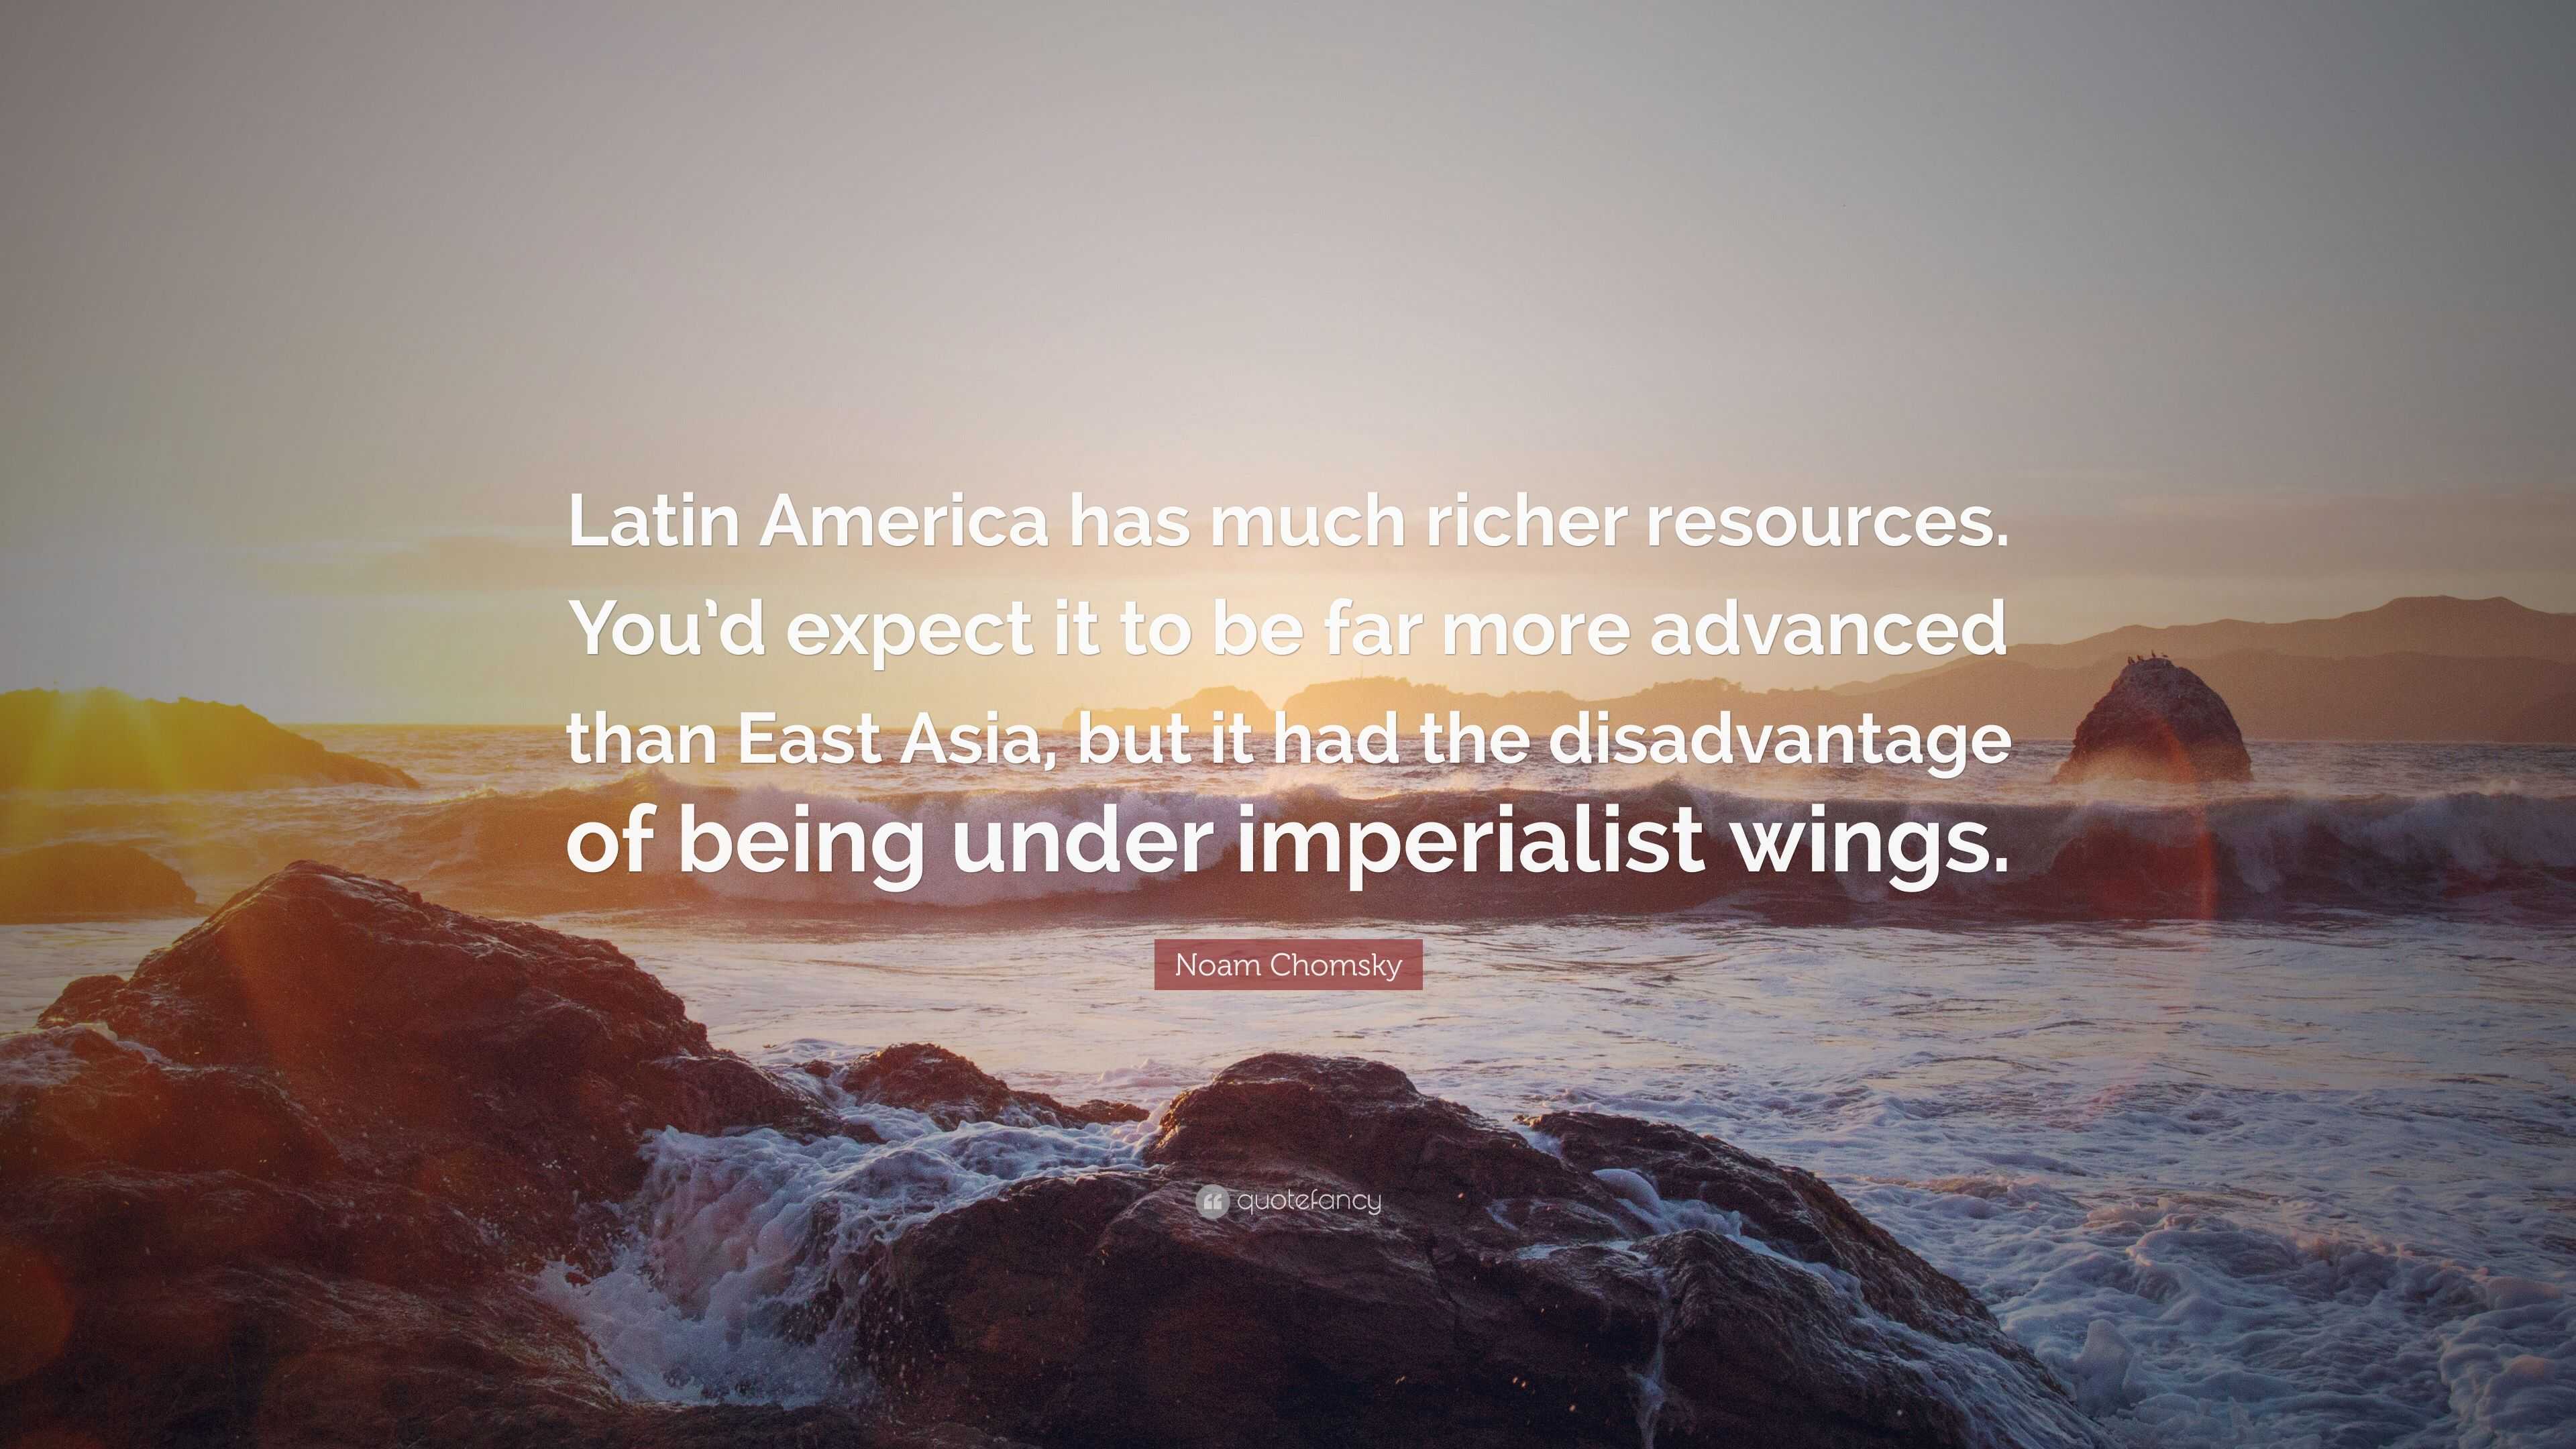 Noam Chomsky Quote: “Latin America has much richer resources. You'd expect  it to be far more advanced than East Asia, but it had the disadvan”